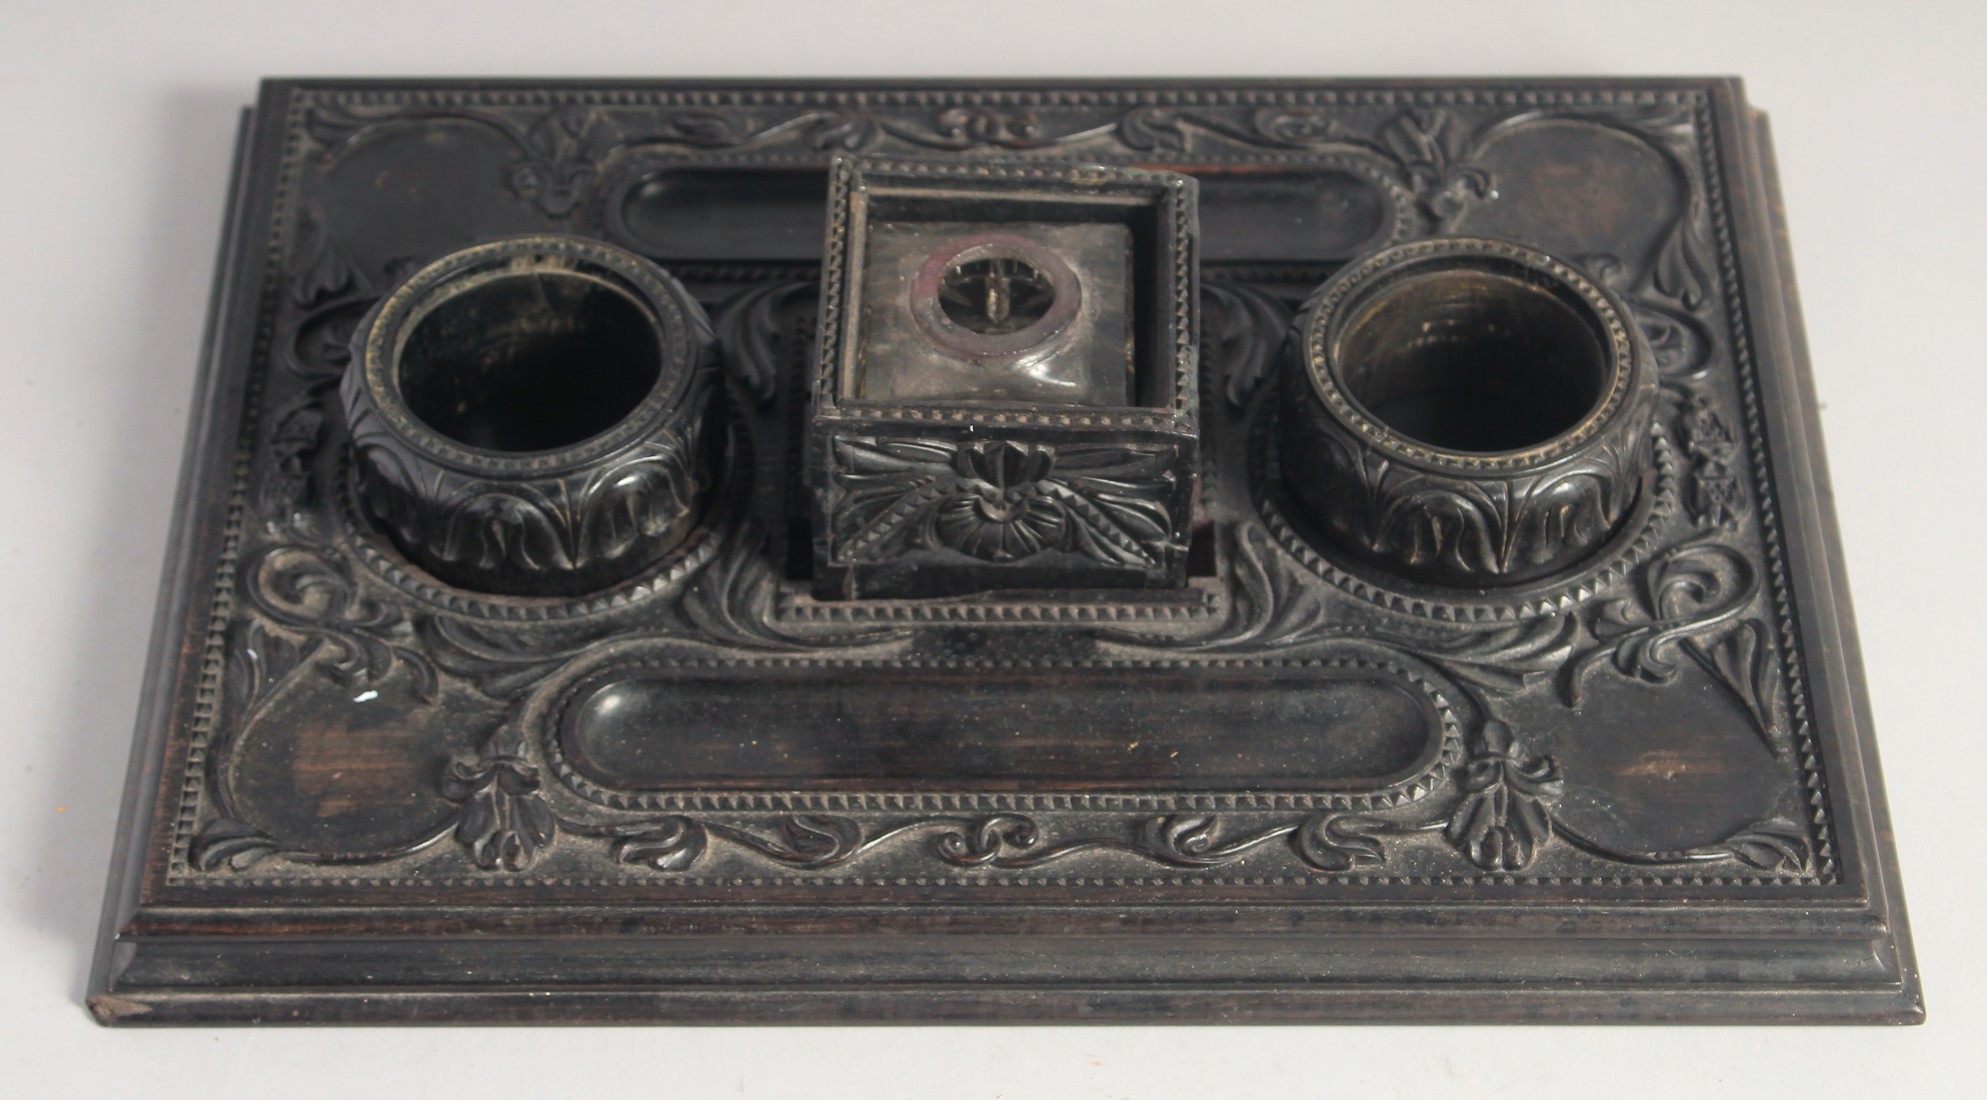 A FINELY CAREVD EARLY 19TH CENTURY SRI LANKAN CEYLANESE EBONY INK DESK STAND, with a central inset